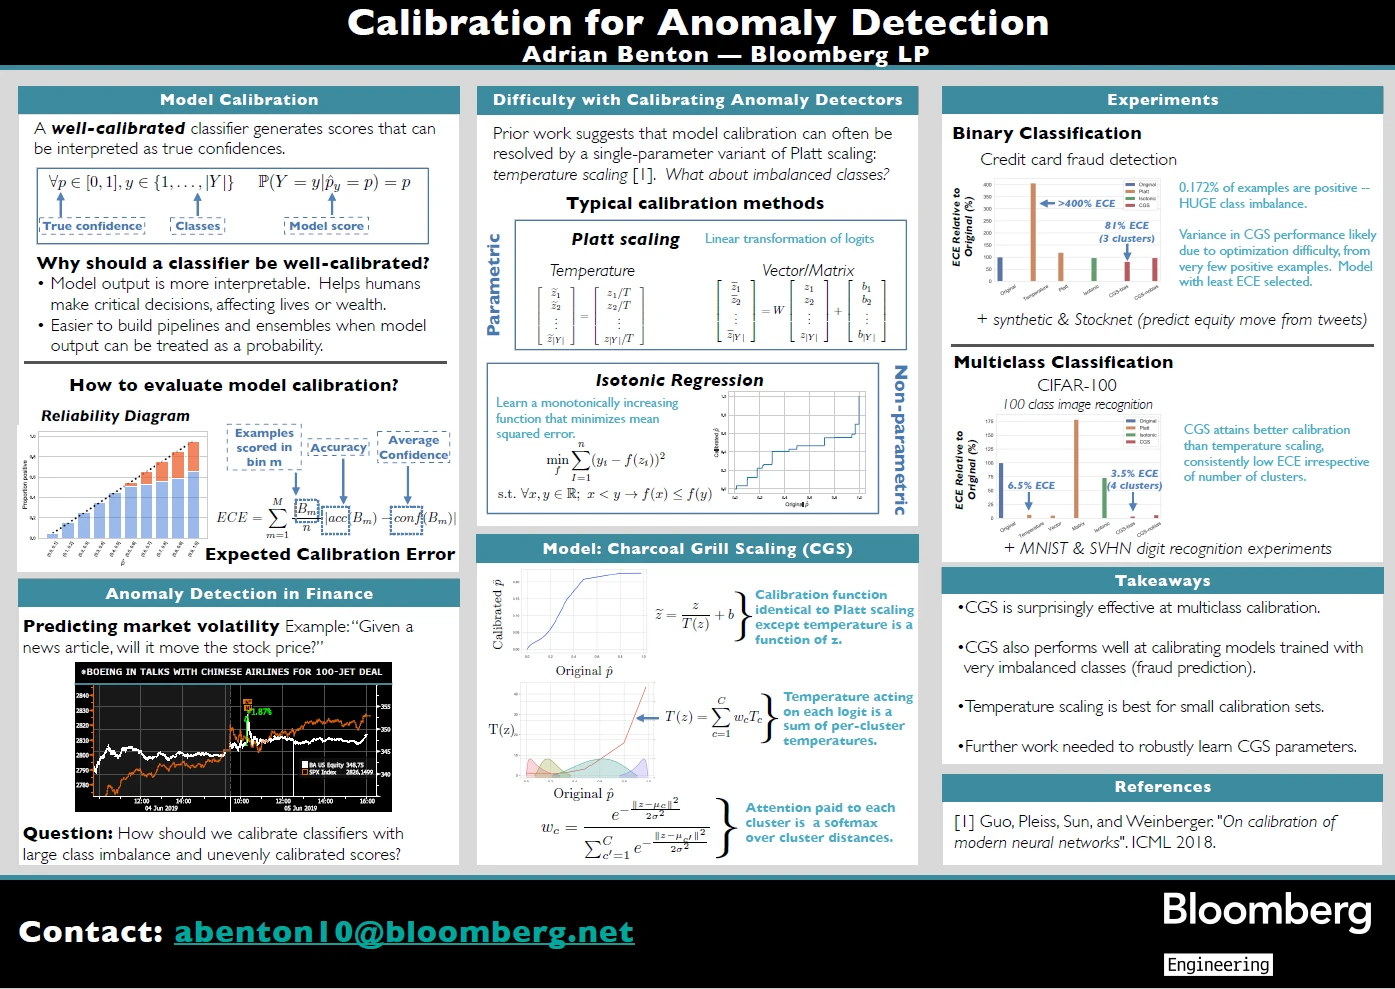 A poster of Calibration for Anomaly Detection, by Adrian Benton at Bloomberg LP. The poster looks at model calibration, anomaly detection in finance, the difficulty with calibrating anomaly detectors, using charcoal grill scaling as a model, along with experiments and takeaways.